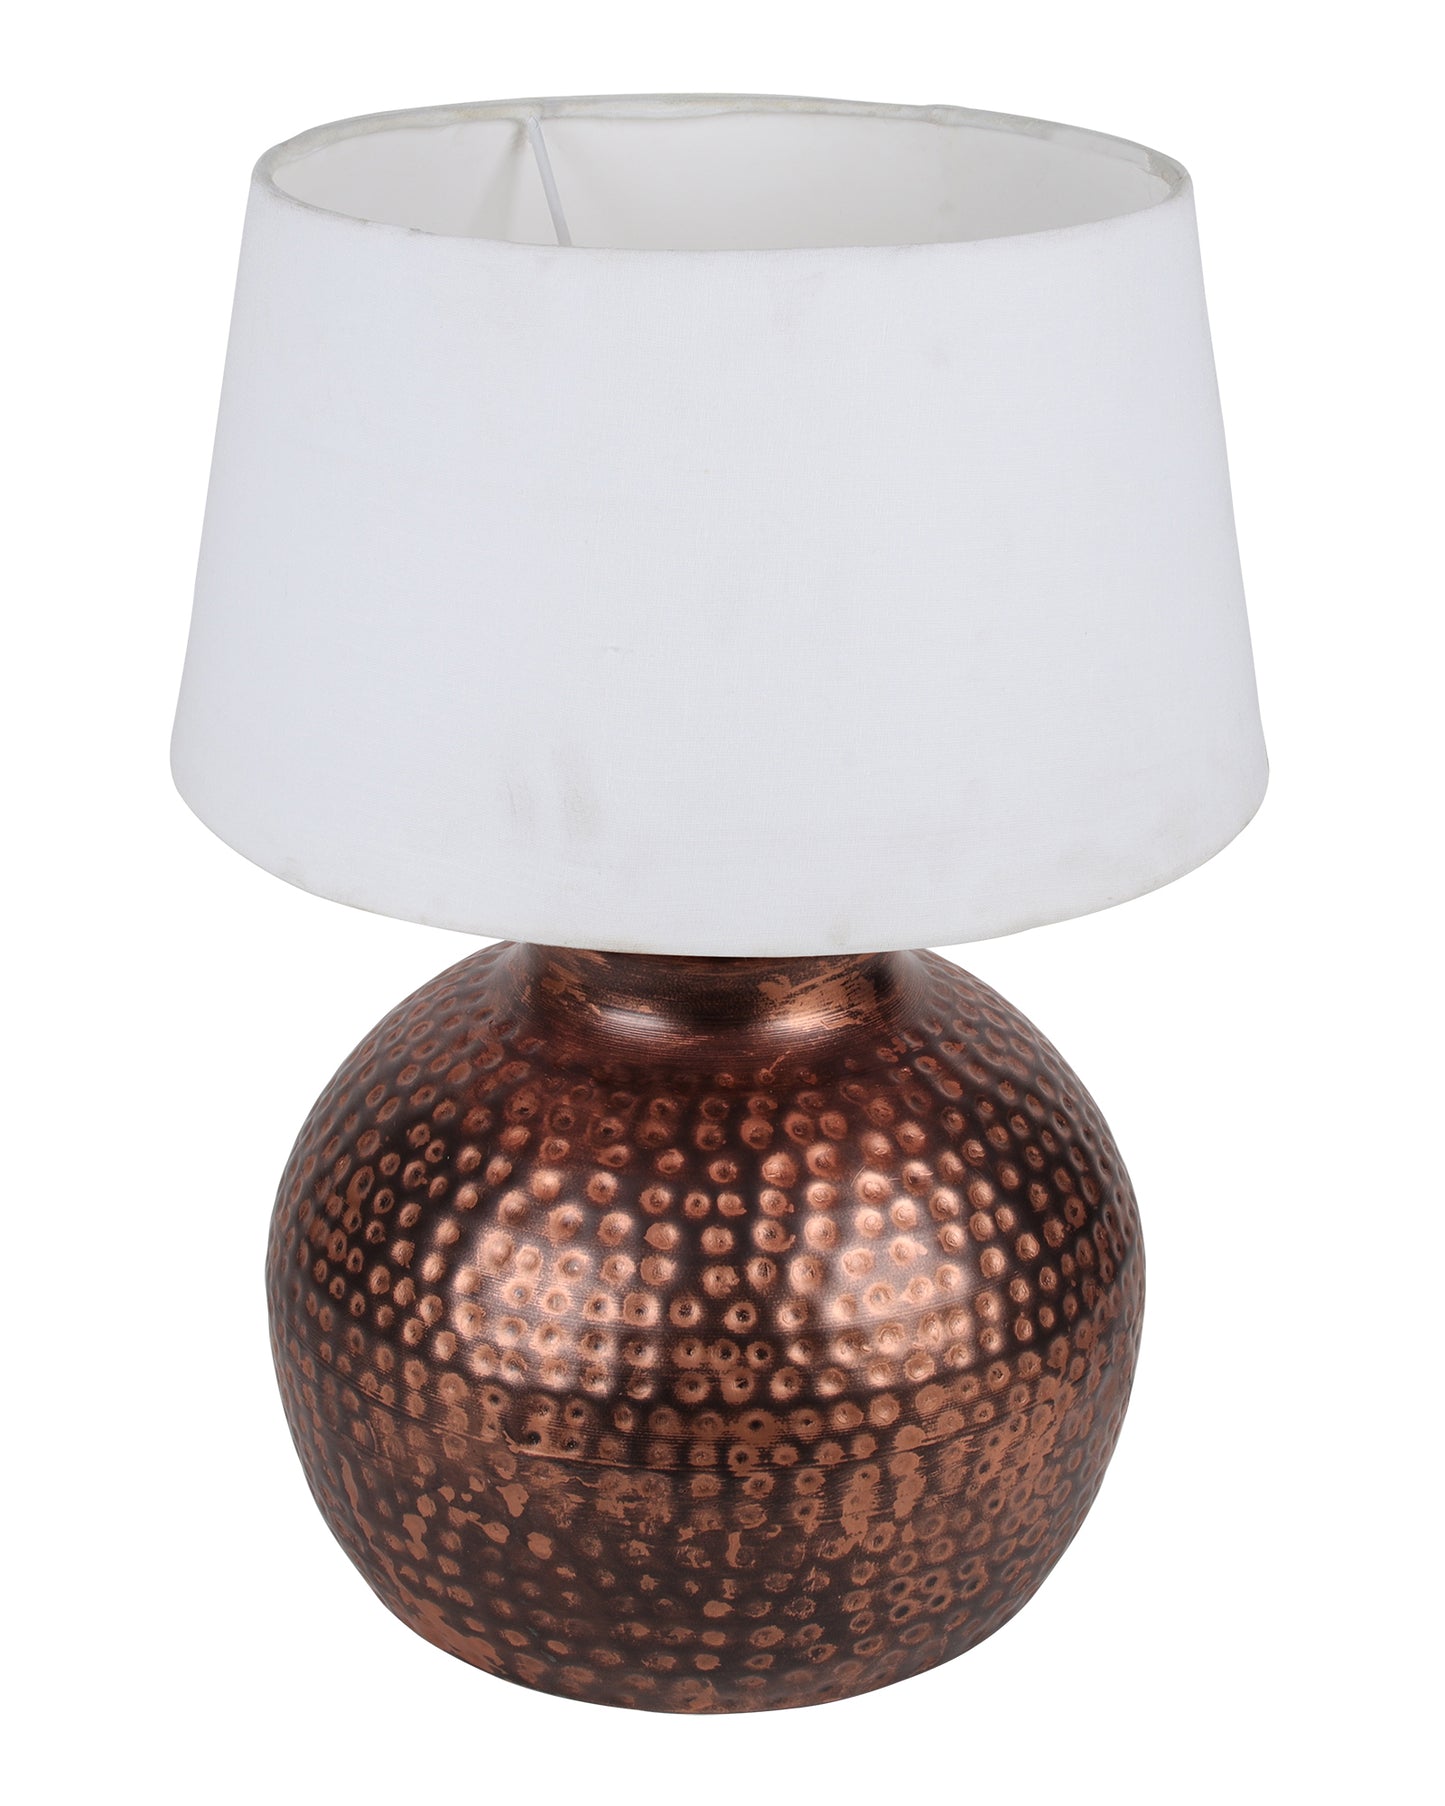 Pot Antique Table Lamp Hammered Oil-Rubbed Bronze Metal Linen Drum Shade for Living Room Family Bedroom